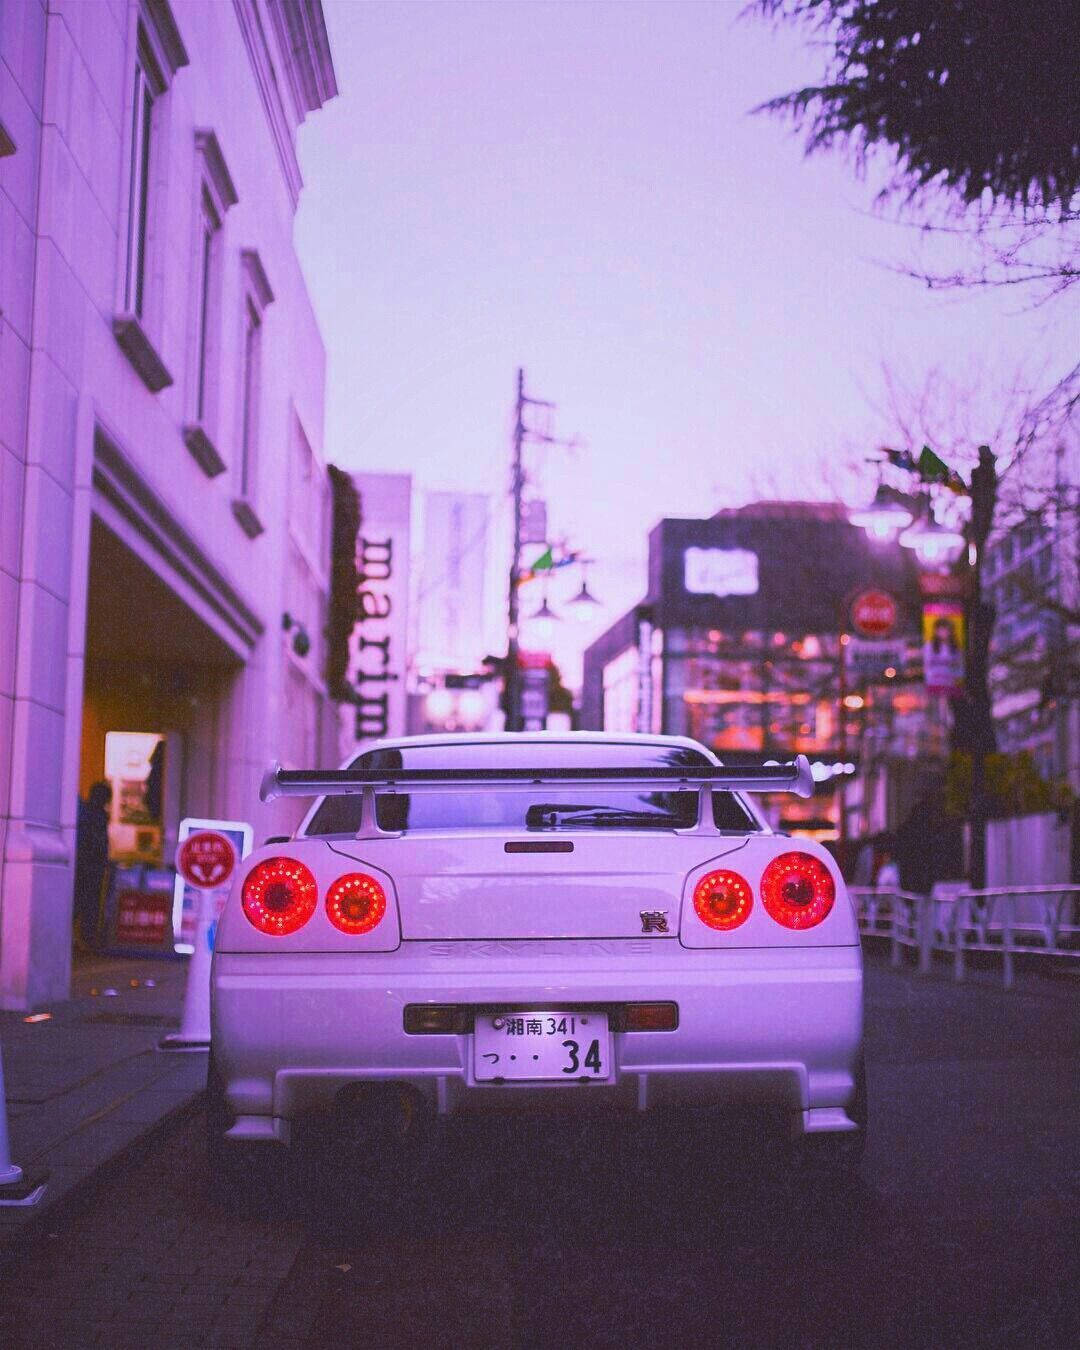 A car with the number 34 on the back parked on the street - Nissan Skyline, JDM, cars